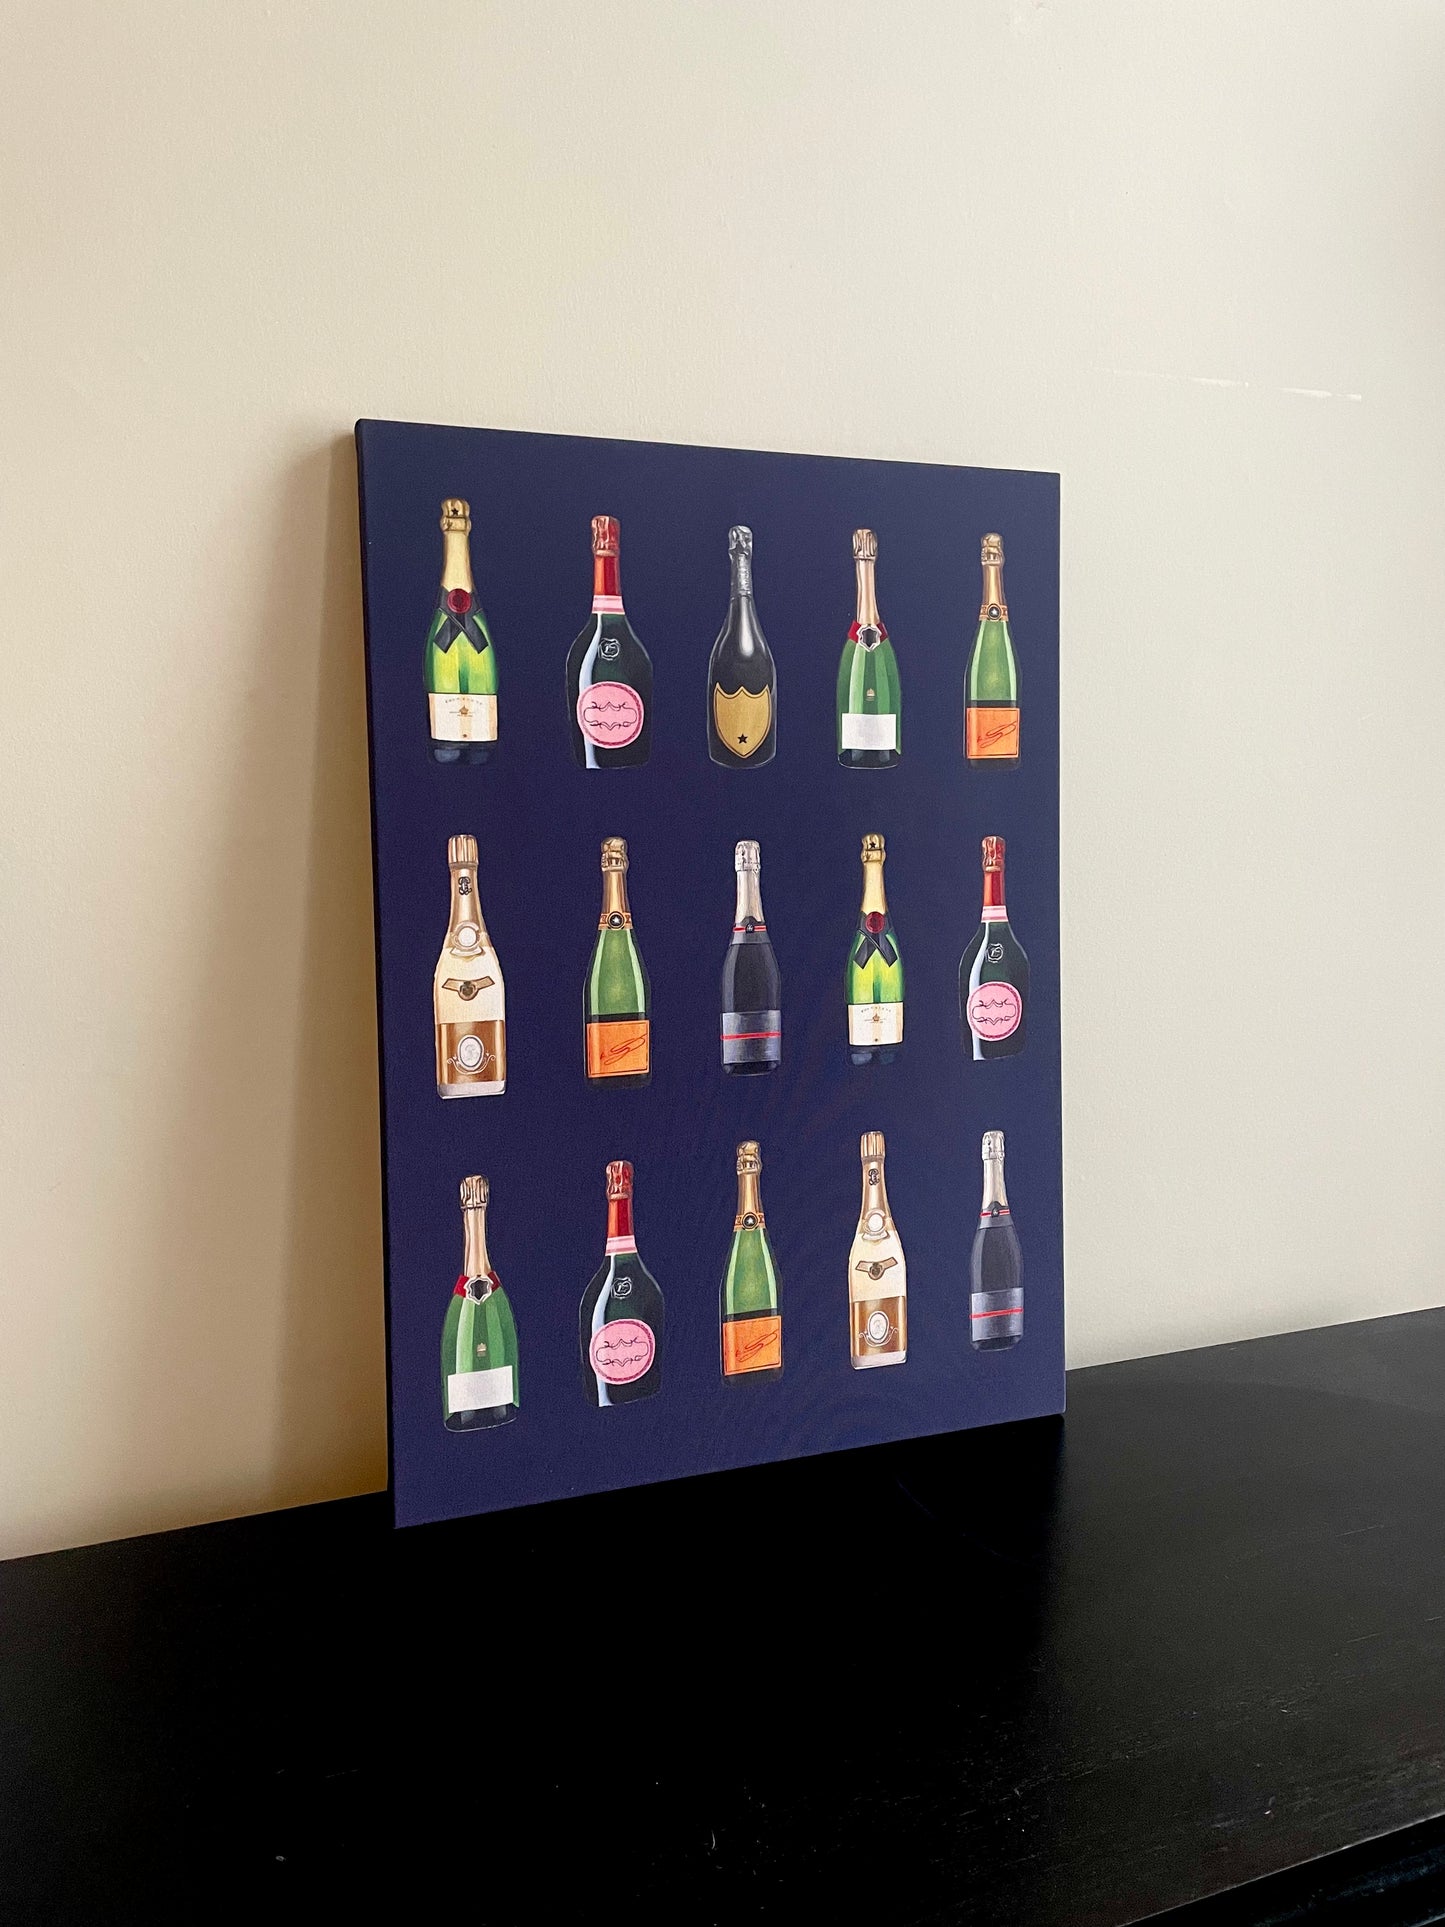 Champagne & Fizz Limited Edition Print